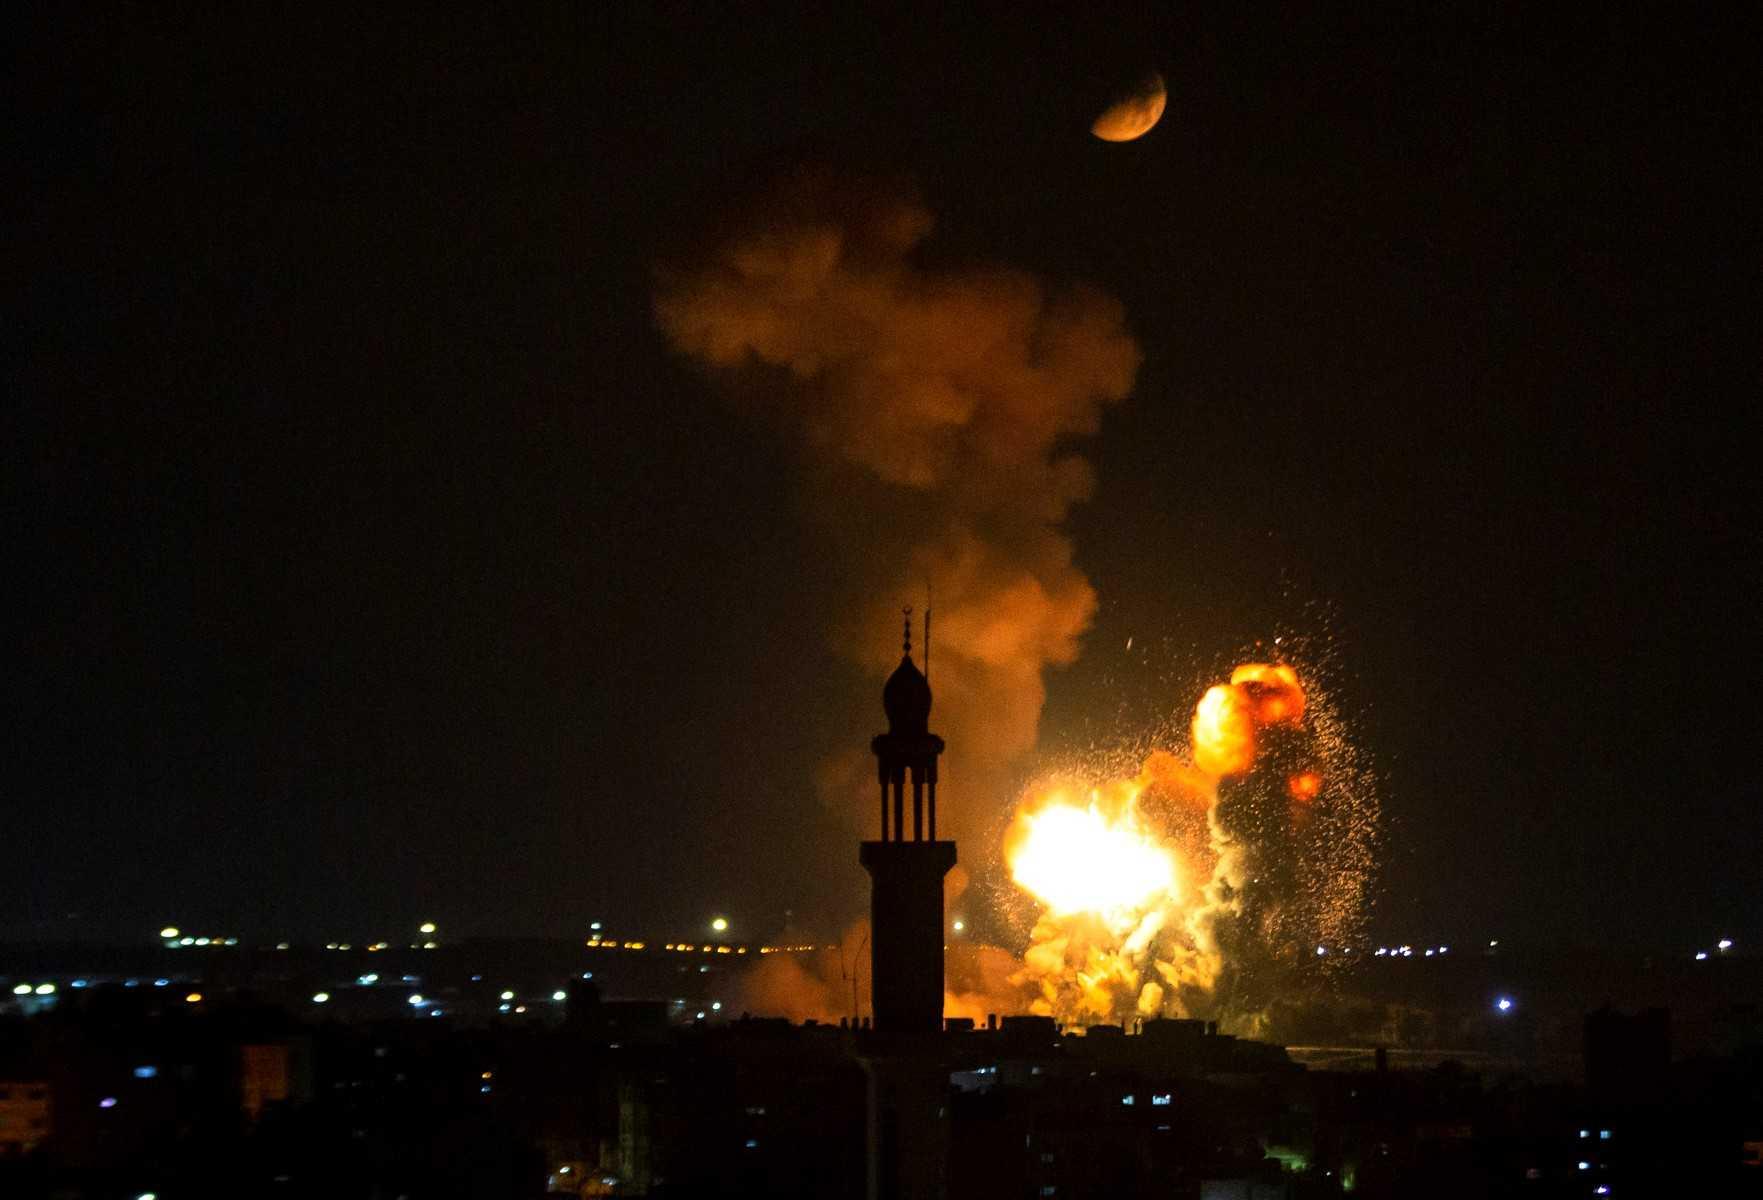 Smoke and fire rise above Khan Yunis in the southern Gaza strip, during an Israeli air strike, on Aug 5. Israel pounded Gaza with air strikes today, triggering a barrage of retaliatory rocket fire from militants in the Palestinian enclave. Photo: AFP